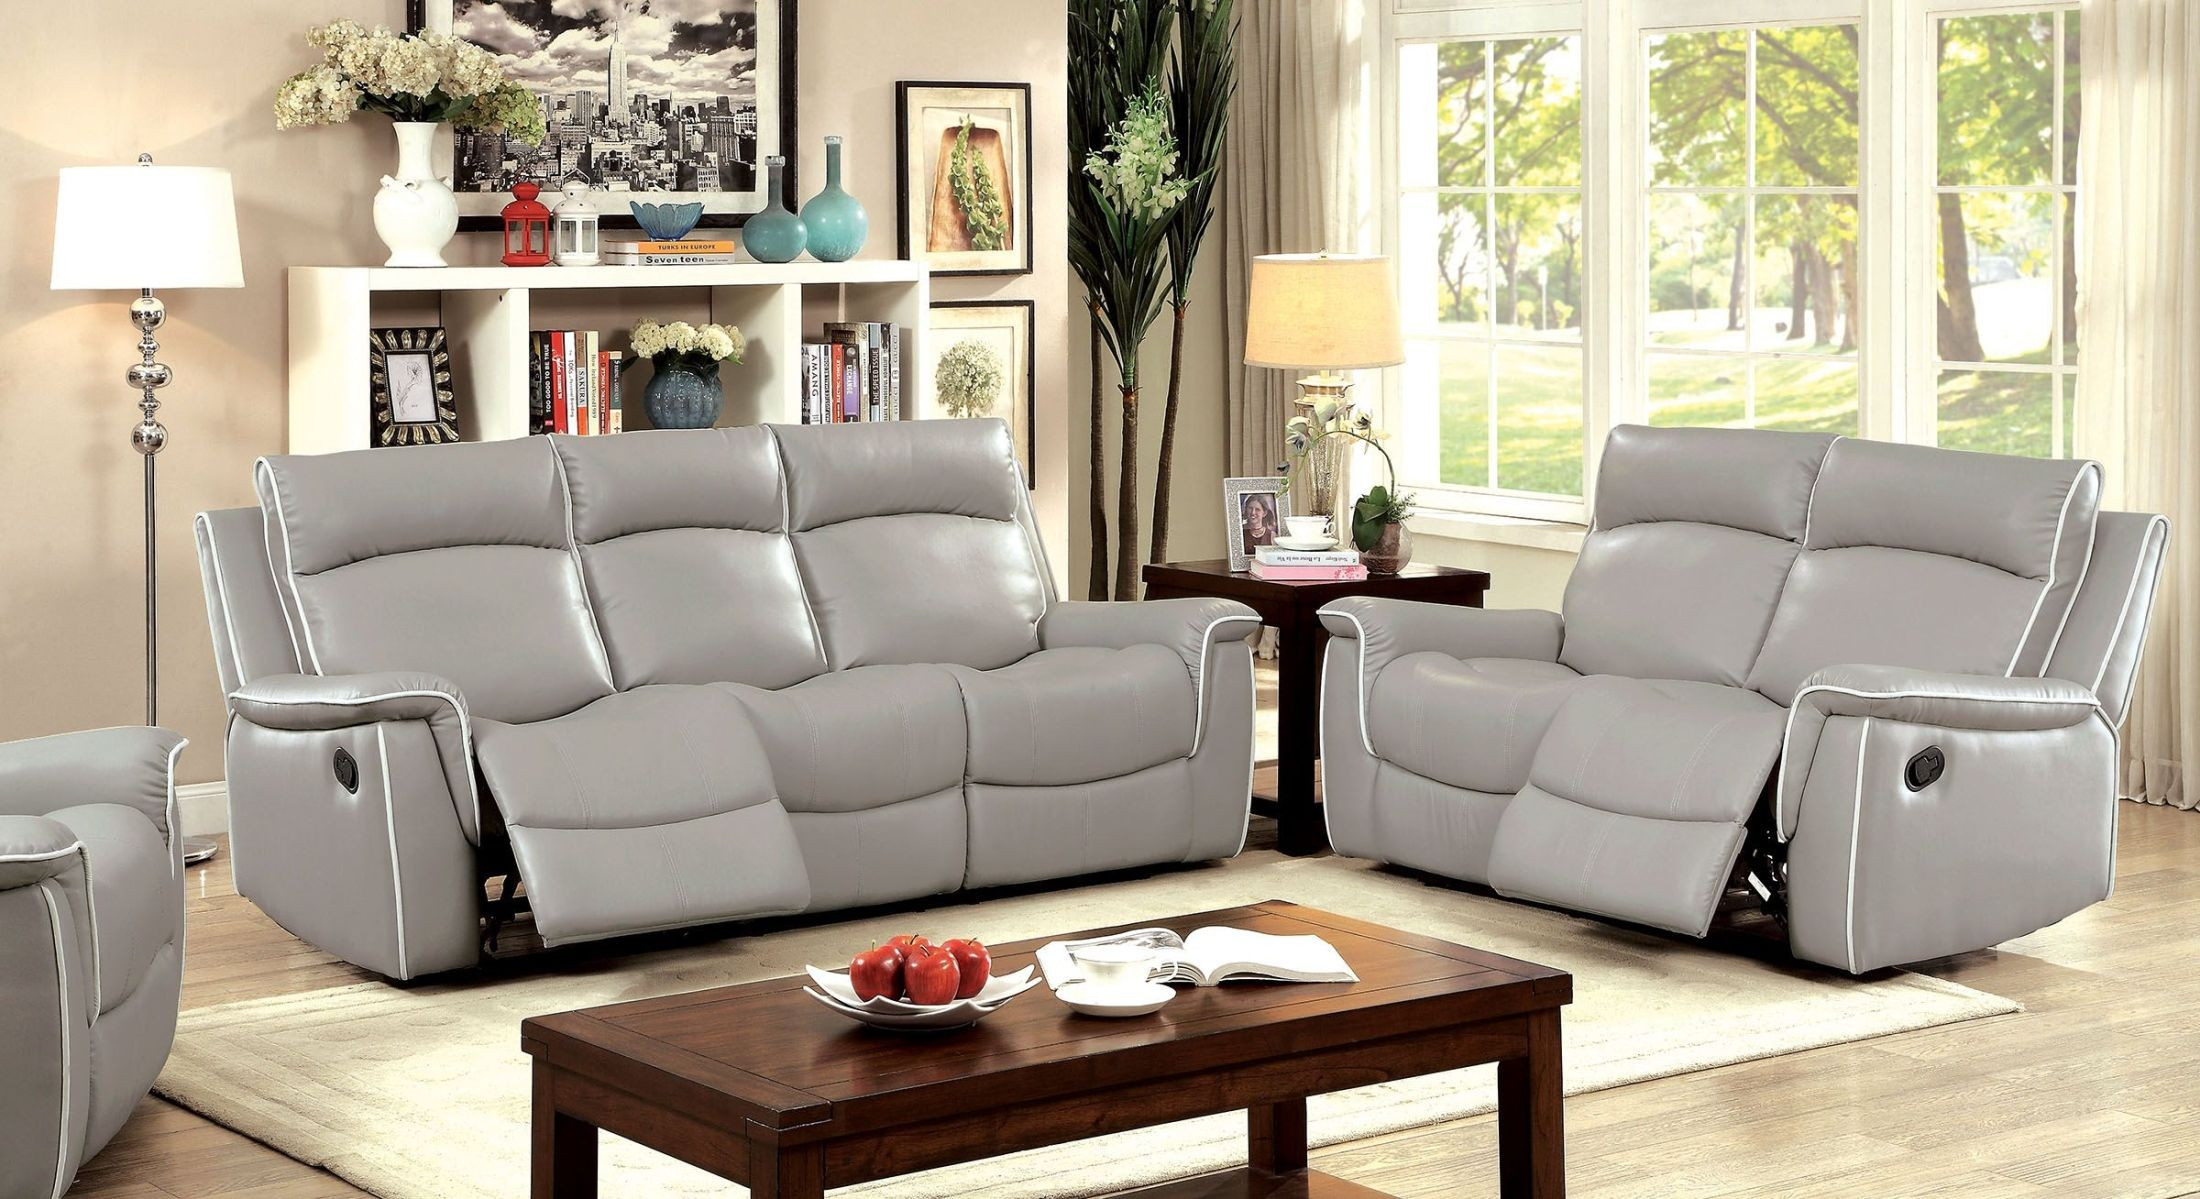 double recliner living room ideas